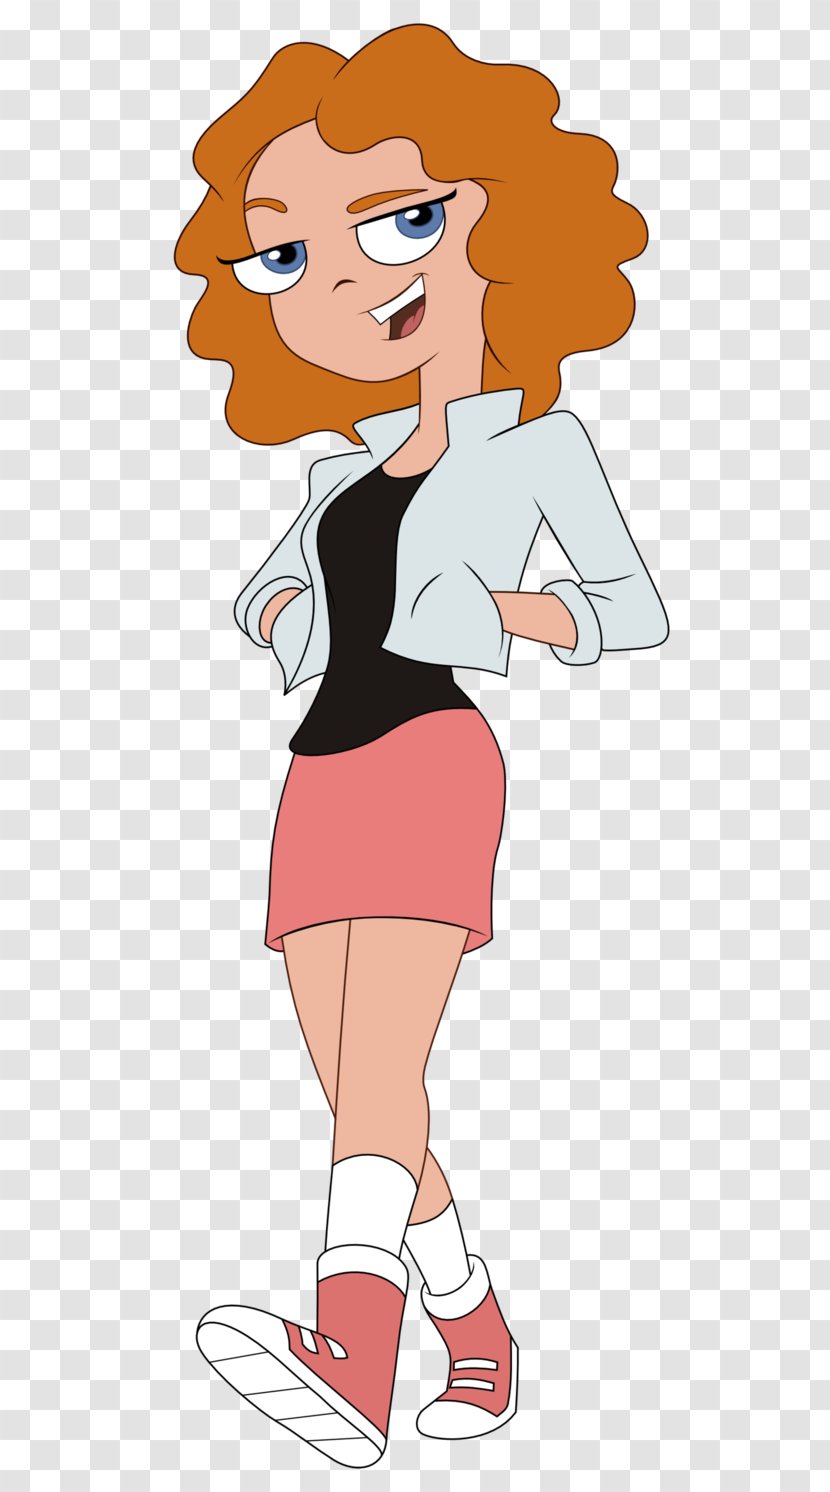 Melissa Chase Milo Murphy Zack Underwood Disney Channel Character - Watercolor Transparent PNG